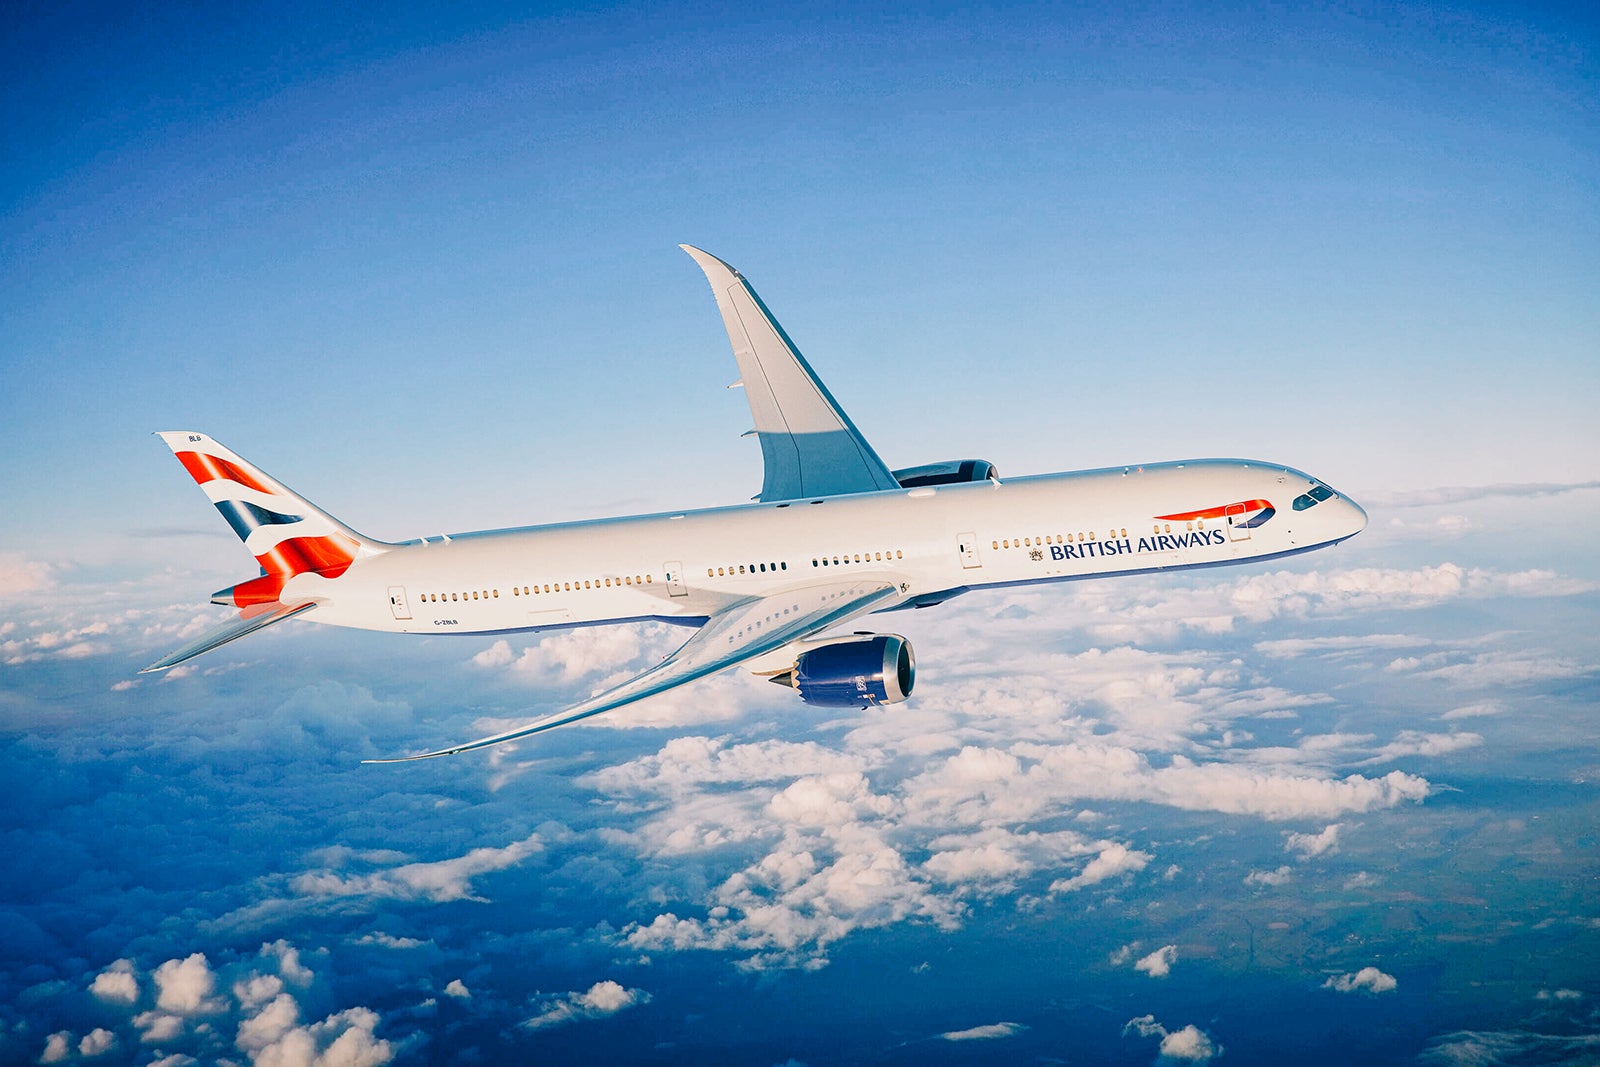 British Airways Executive Club: Guide to Avios, elite status and transfer partners – The Points Guy